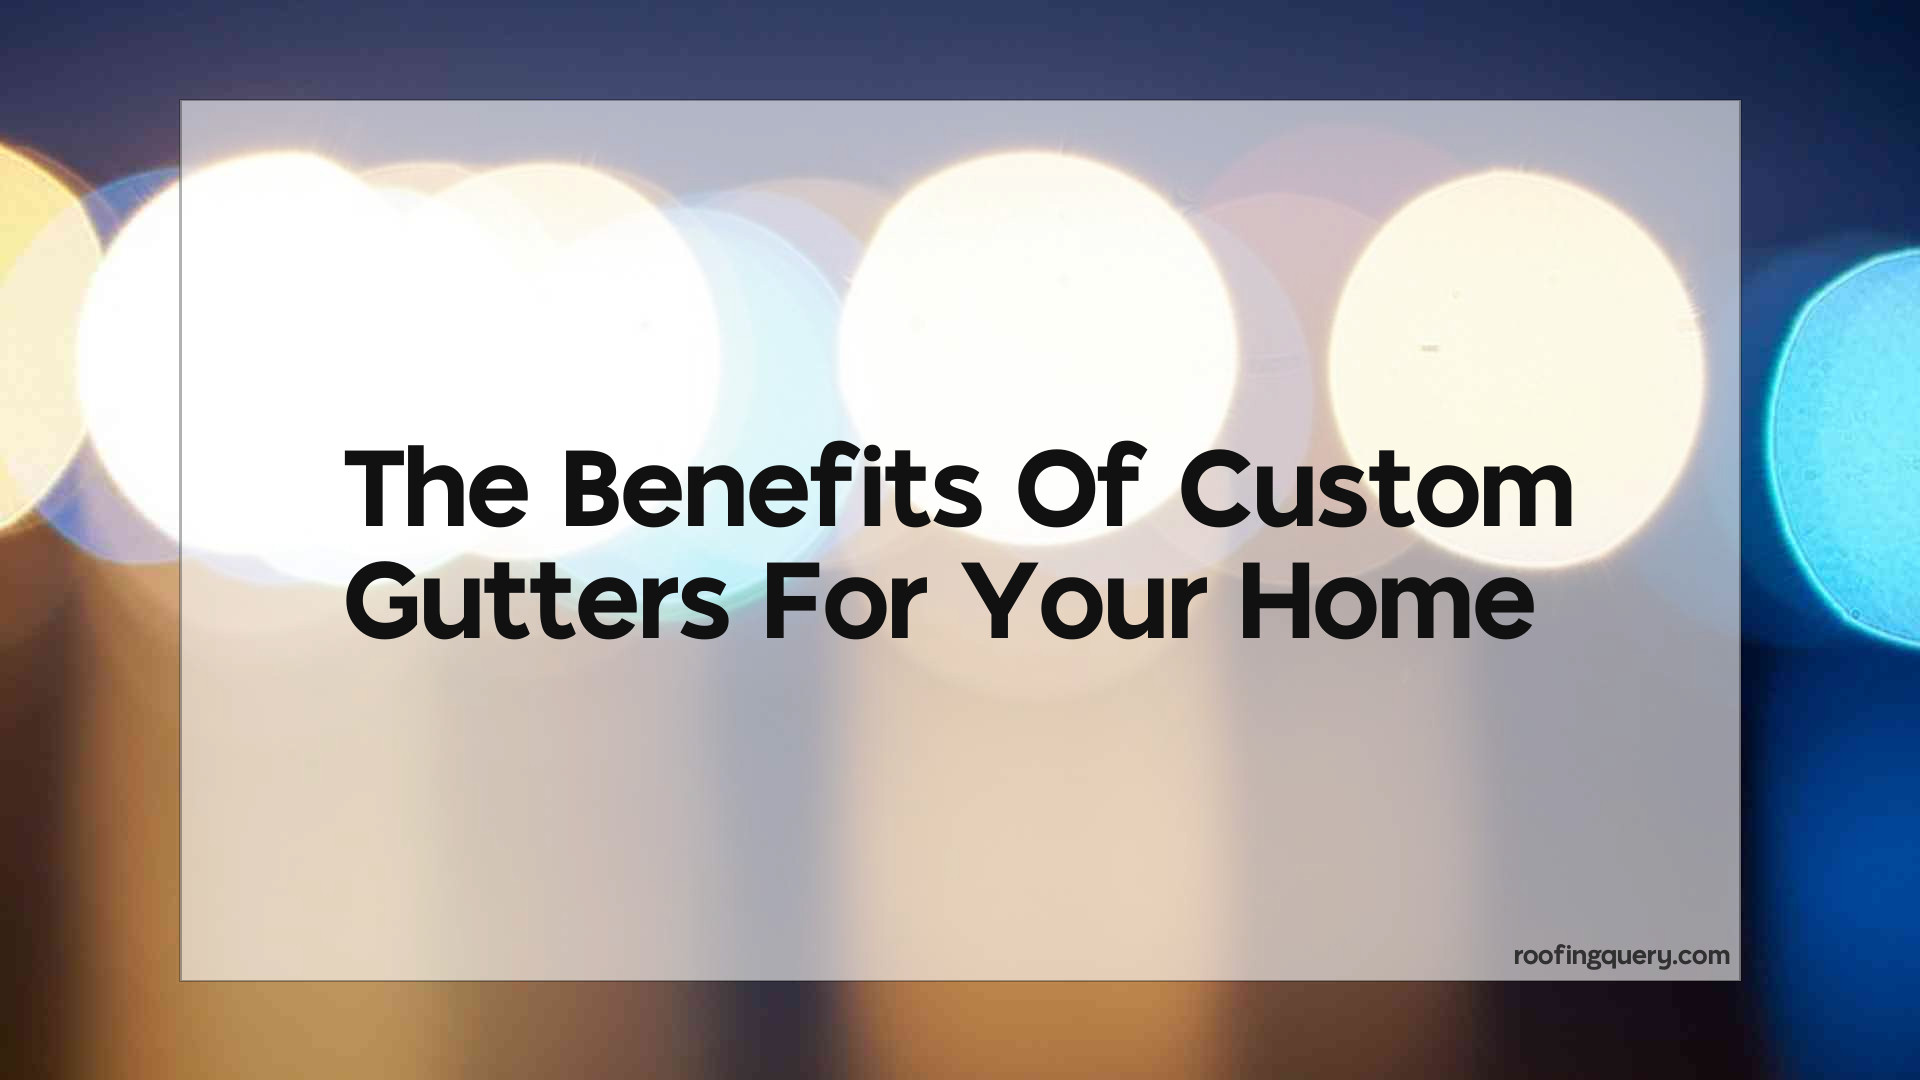 The Benefits Of Custom Gutters For Your Home